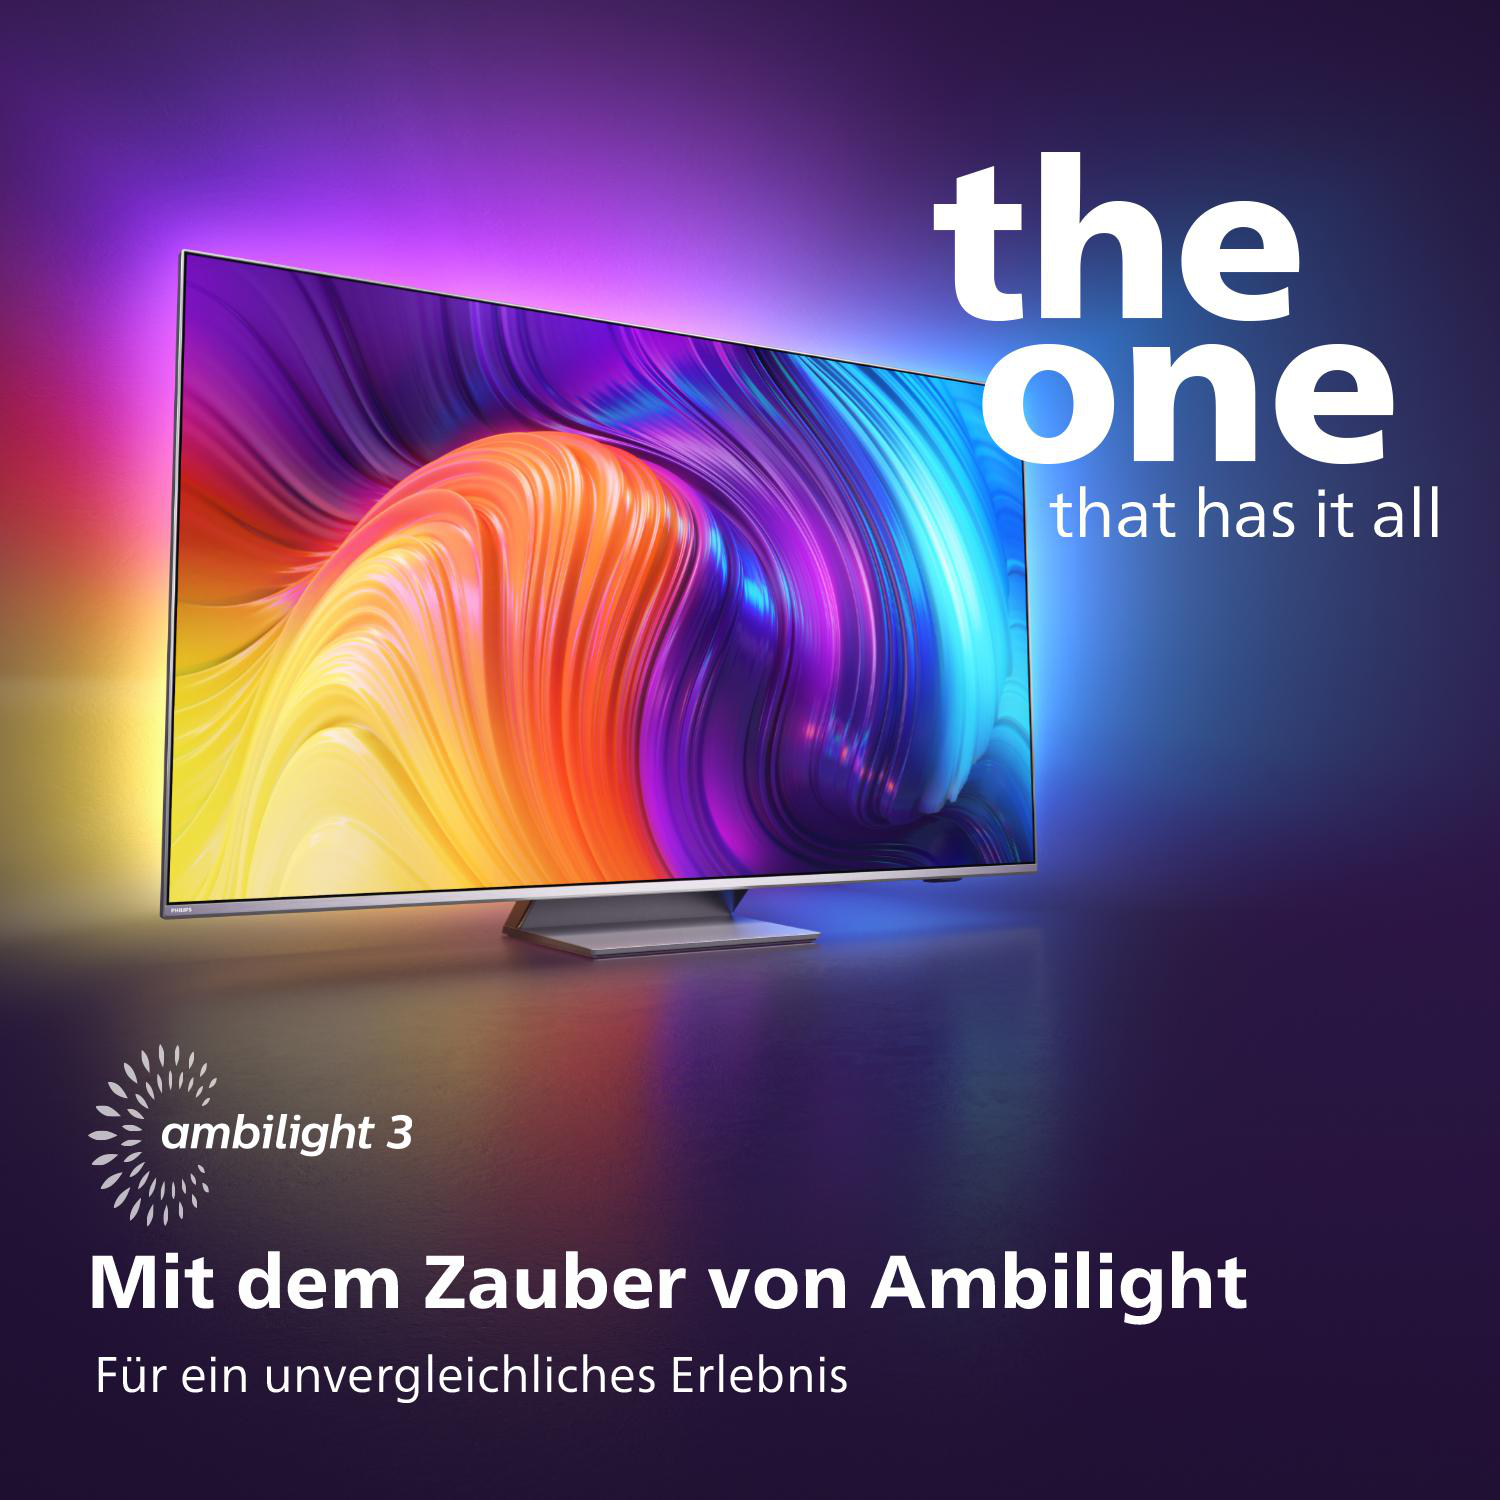 TV™ 126 50 cm, UHD SMART 4K, PHILIPS (Flat, (50 50PUS8837/12 4K (R)) TV 11 Ambilight, TV, Android / LED Zoll Zoll) UHD The One